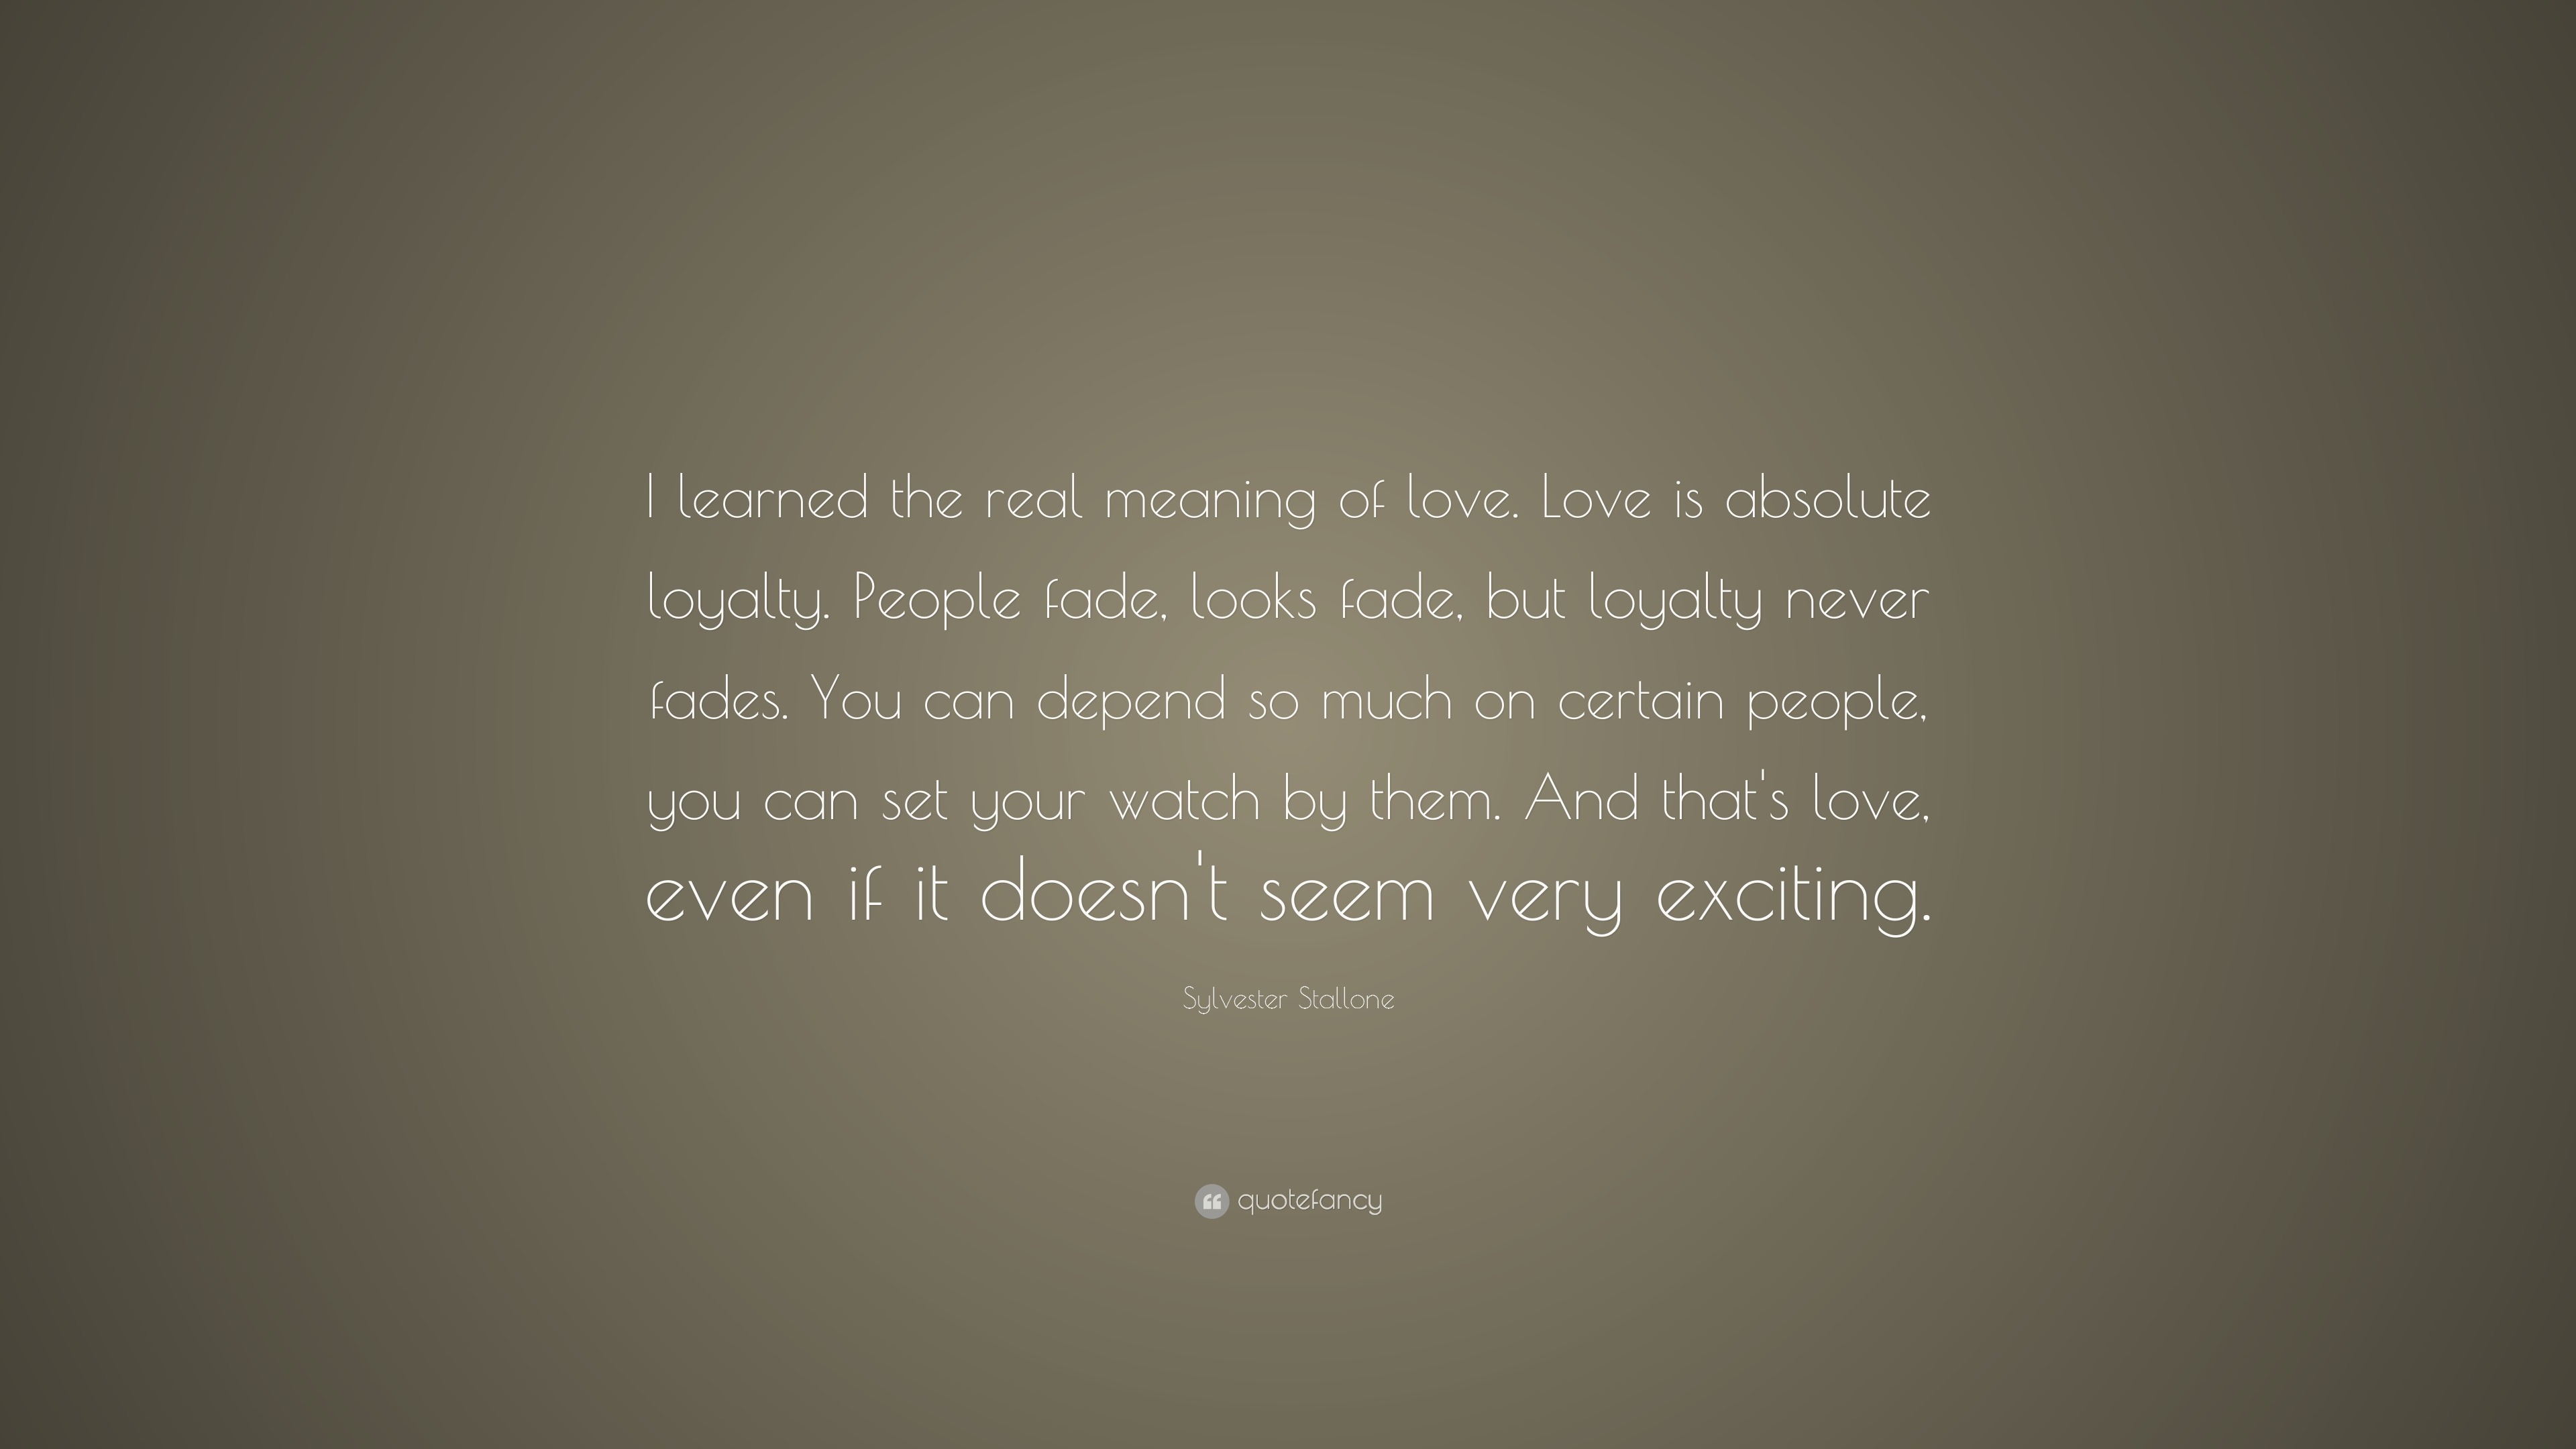 Sylvester Stallone Quote “I learned the real meaning of love Love is absolute